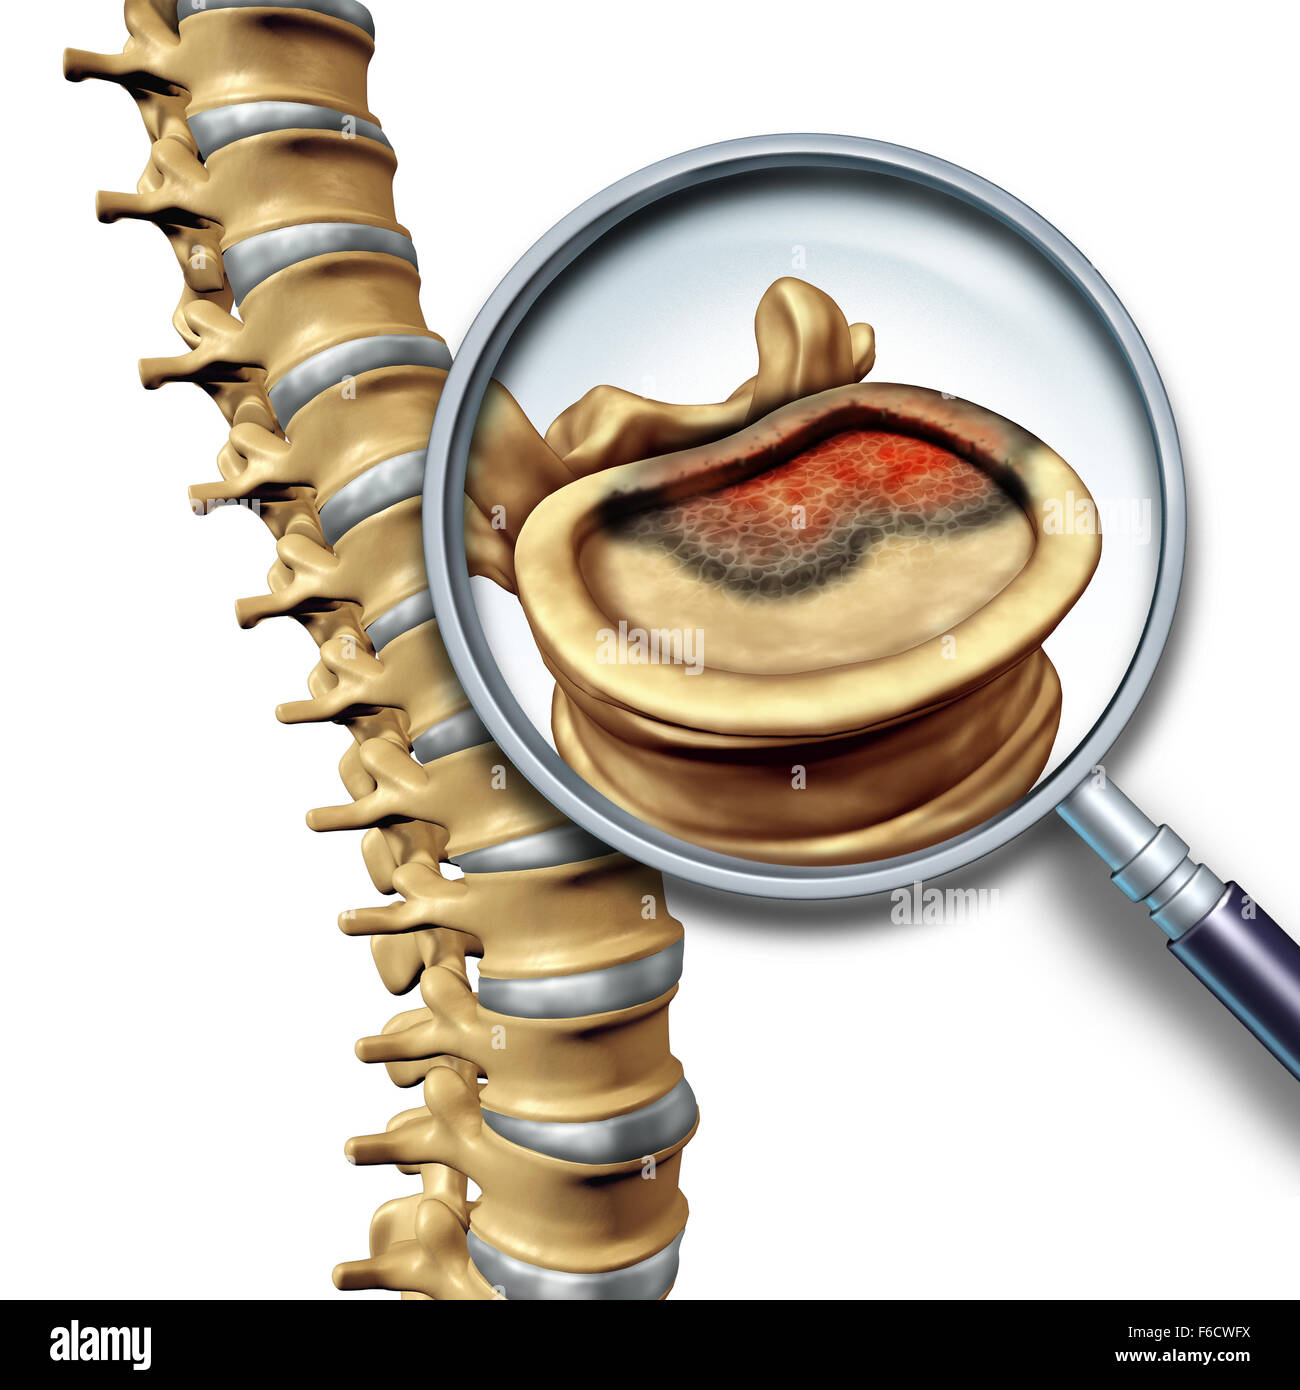 Spine cancer and spinal tumor disease medical concept as skeletal vertebra with a magnifying glass close up of a vertabrate with a cancerous growth. Stock Photo